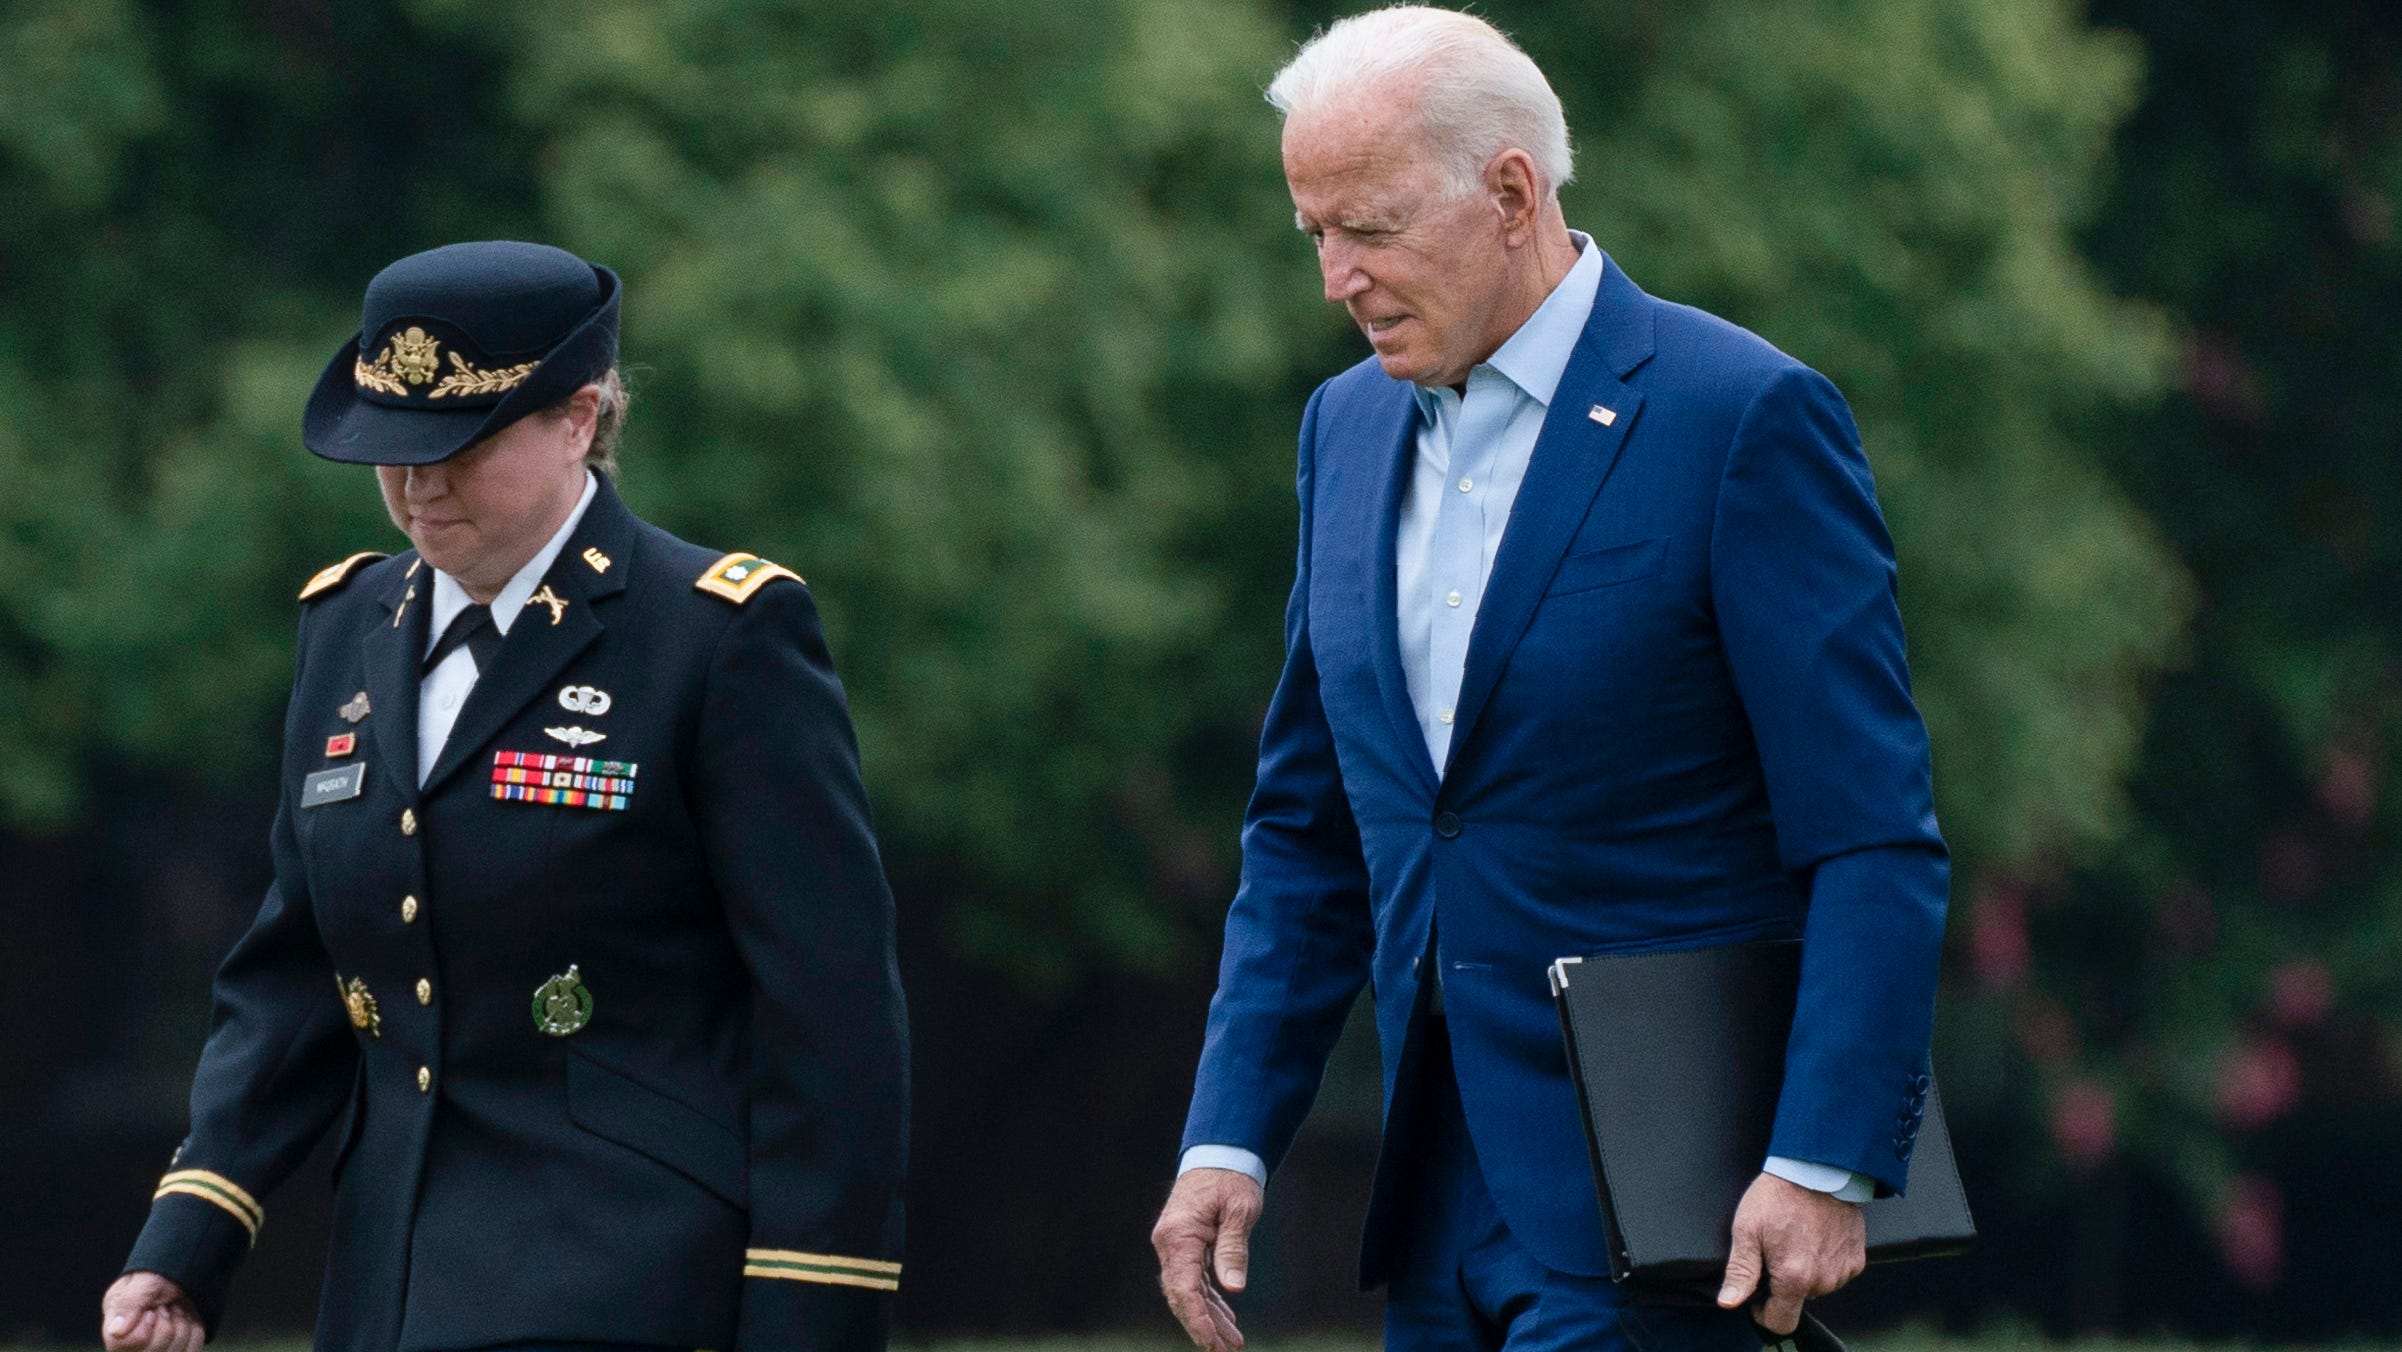 Biden said no one predicted Afghanistan's quick fall 'Not even close'